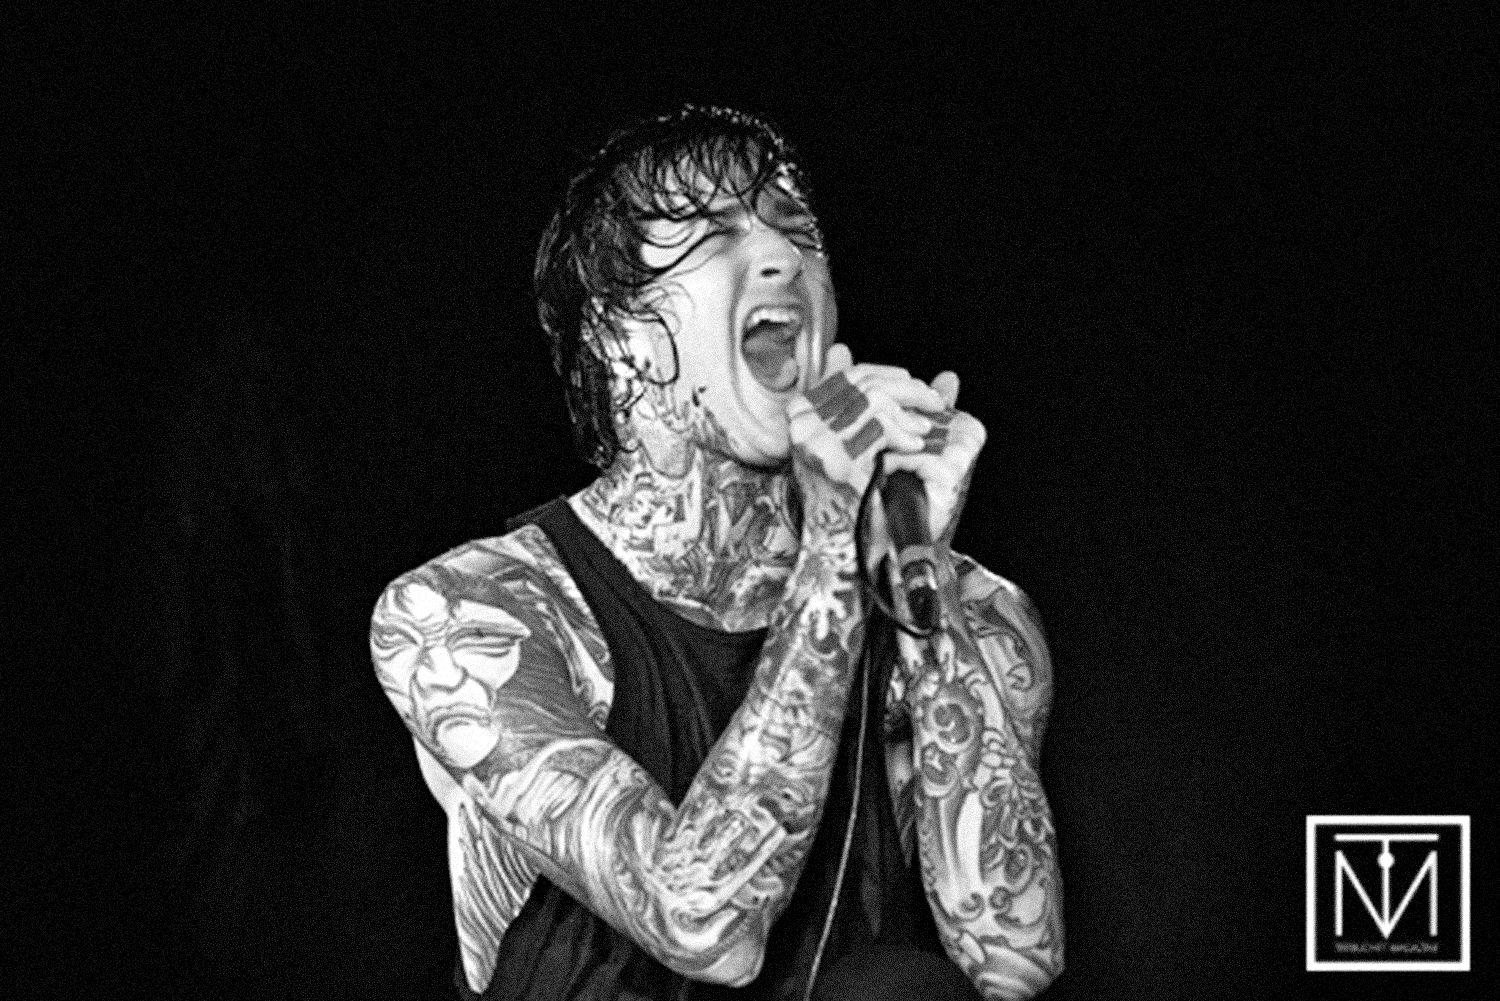 Wallpaper, Suicide Silence, Deathcore, metal band, Mitch Lucker